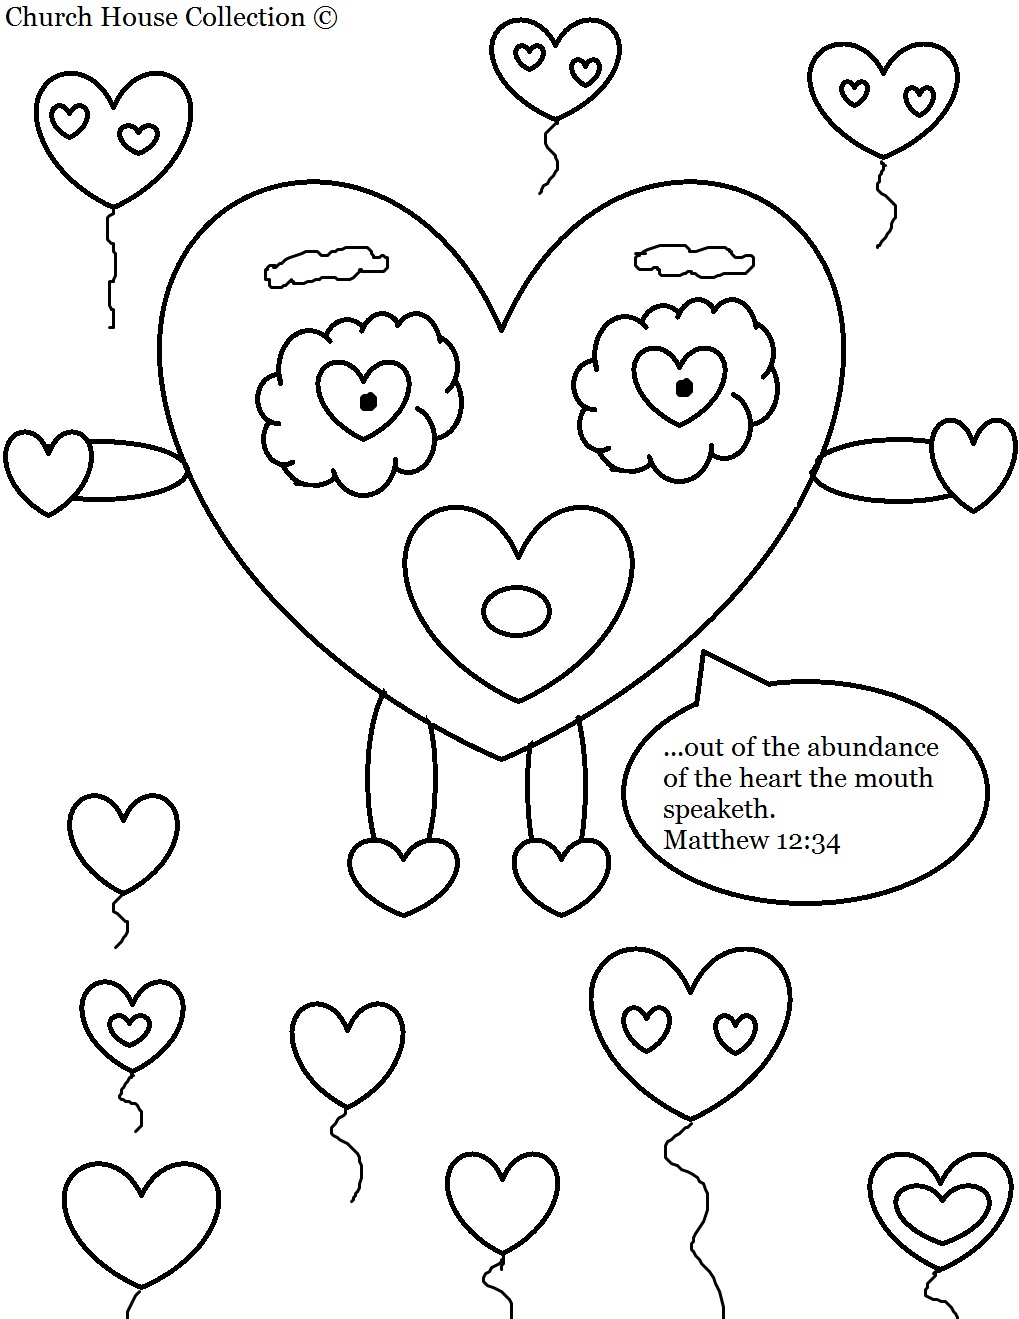 Church House Collection Blog: Valentine's Day Heart Coloring Page For